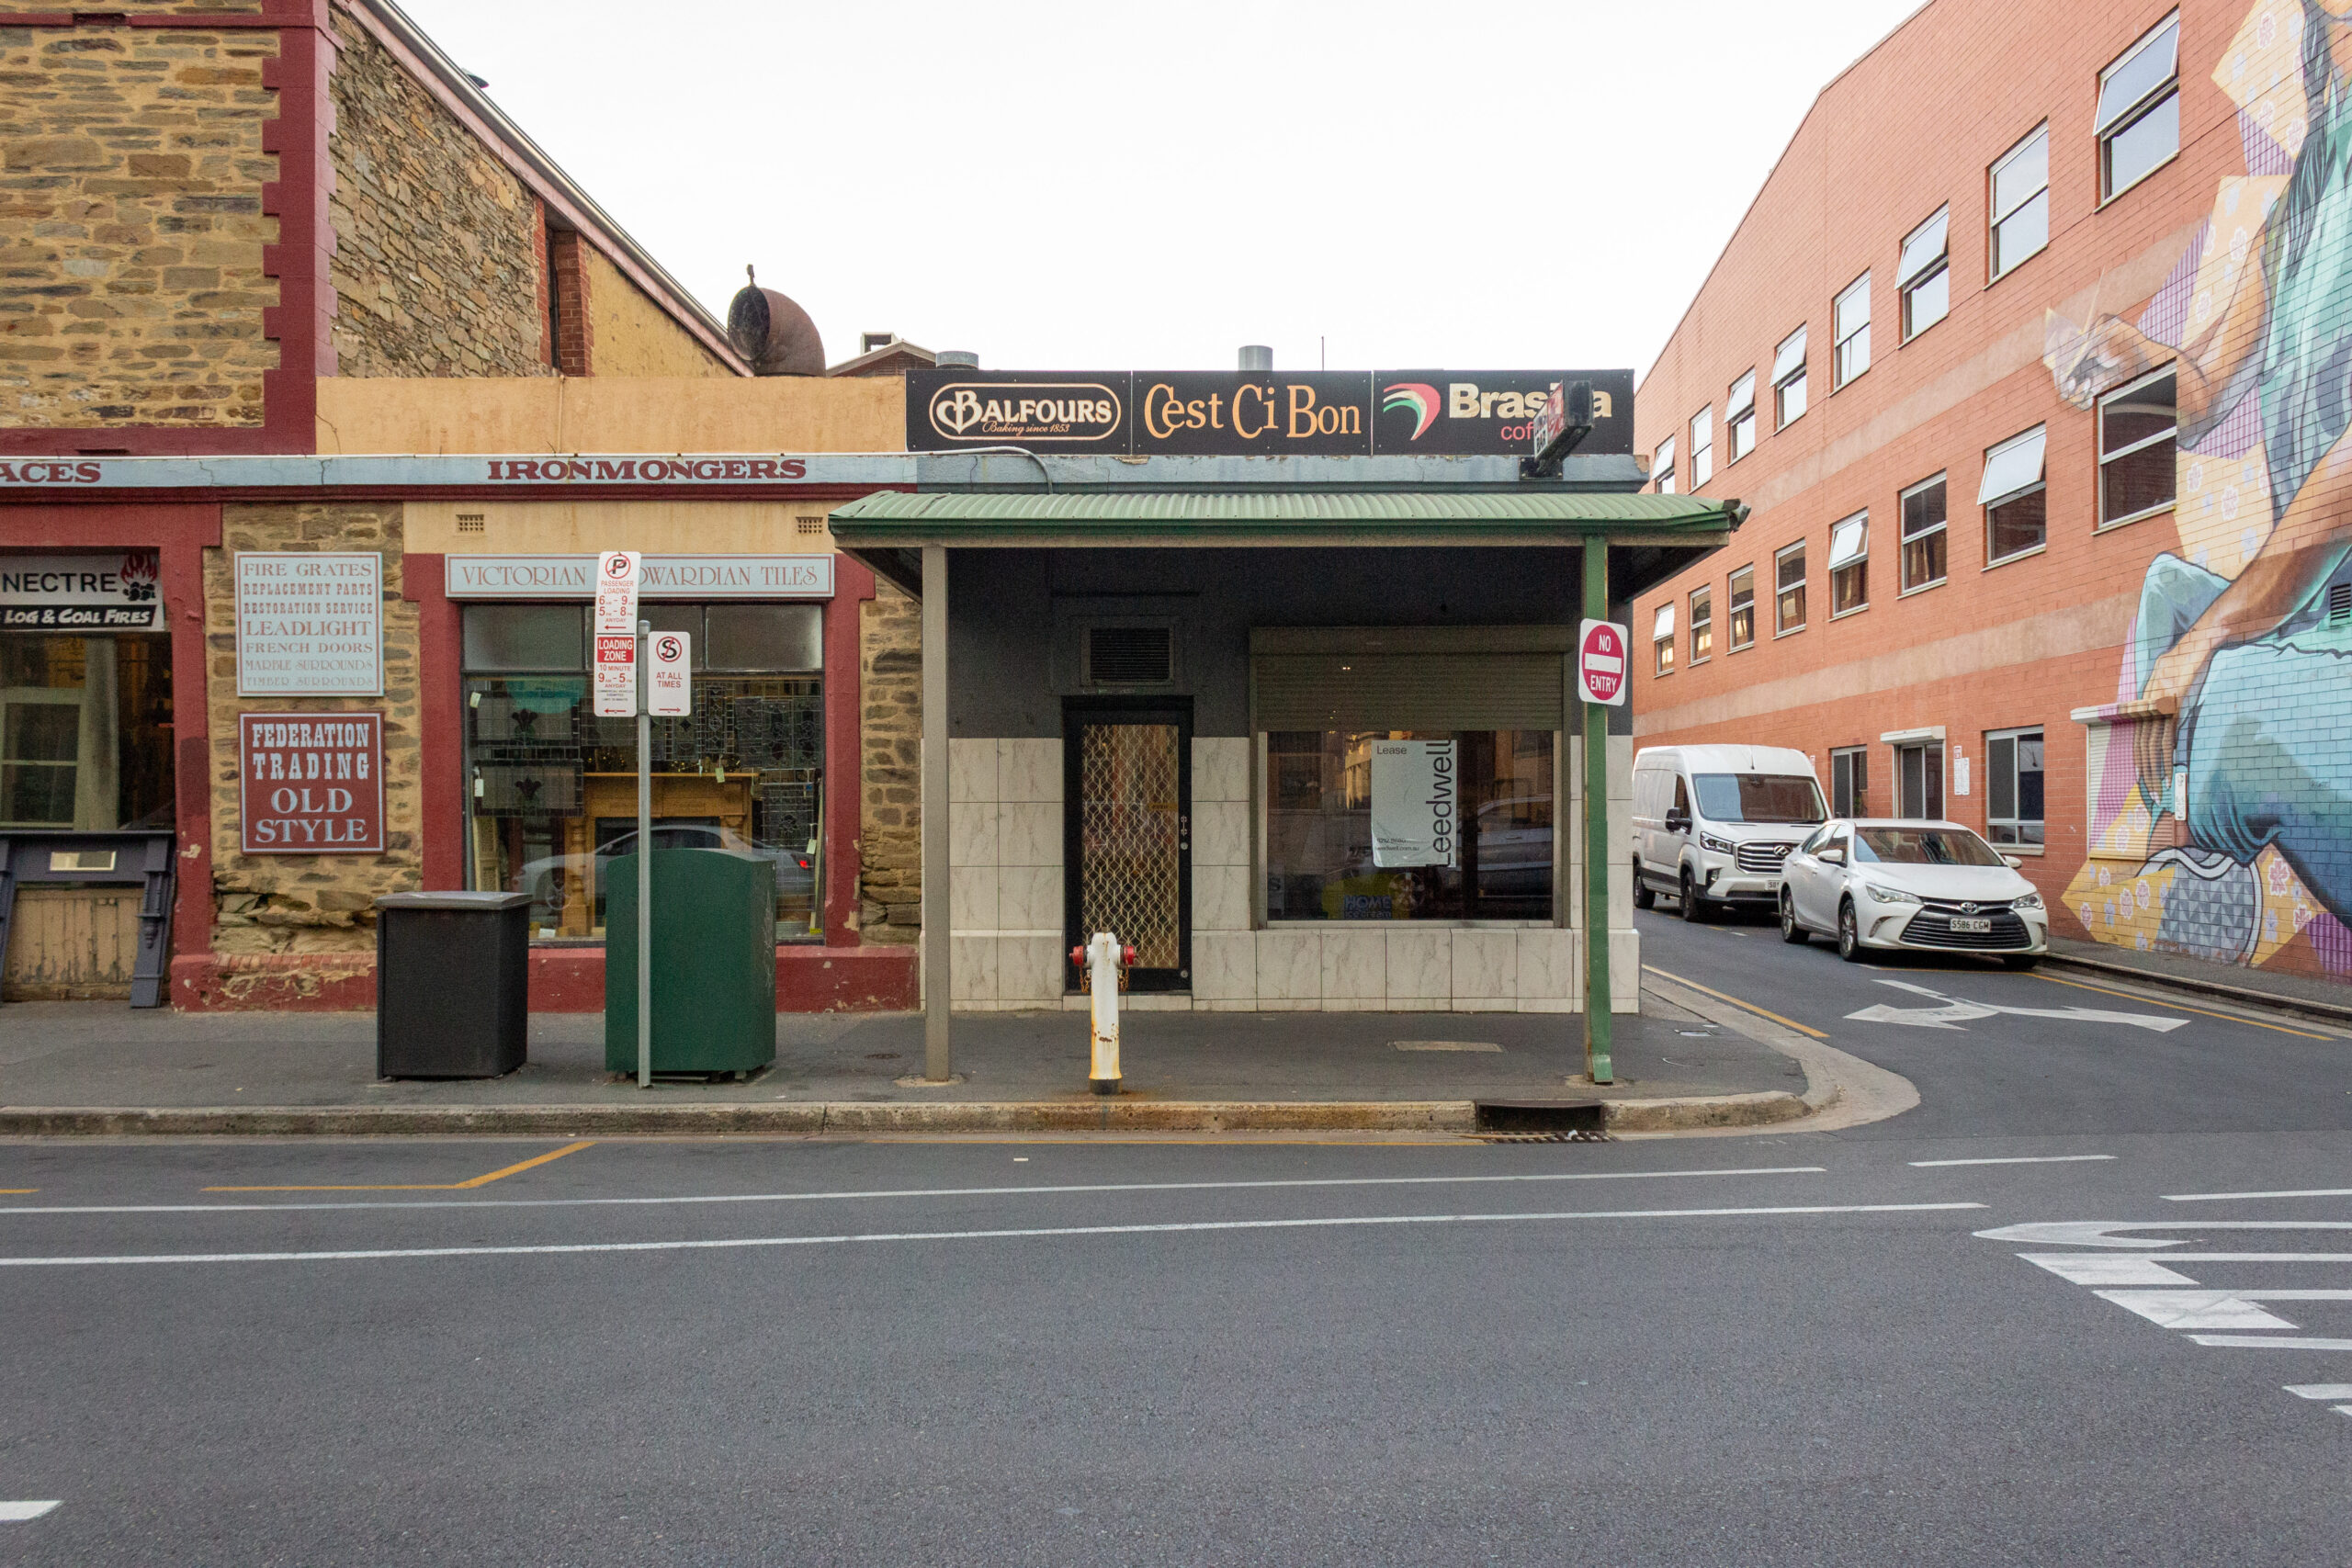 A front street view of the cafe located at 133 Waymouth Street, Adelaide. The facade includes signage for "Balfours," "C’est Ci Bon," and "Brasilia Coffee." Adjacent to the cafe is an ironmonger's shop "Federation Trading".